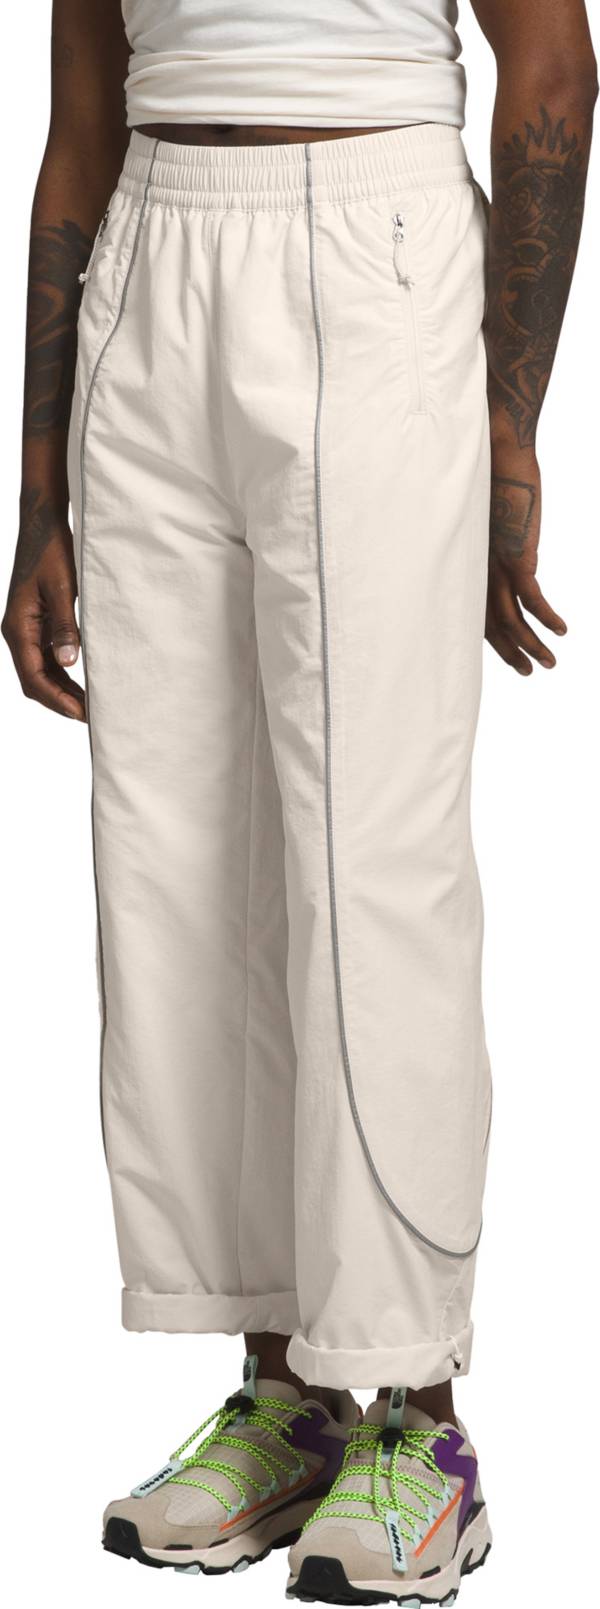 The North Face Women's Tek Piping Wind Pants